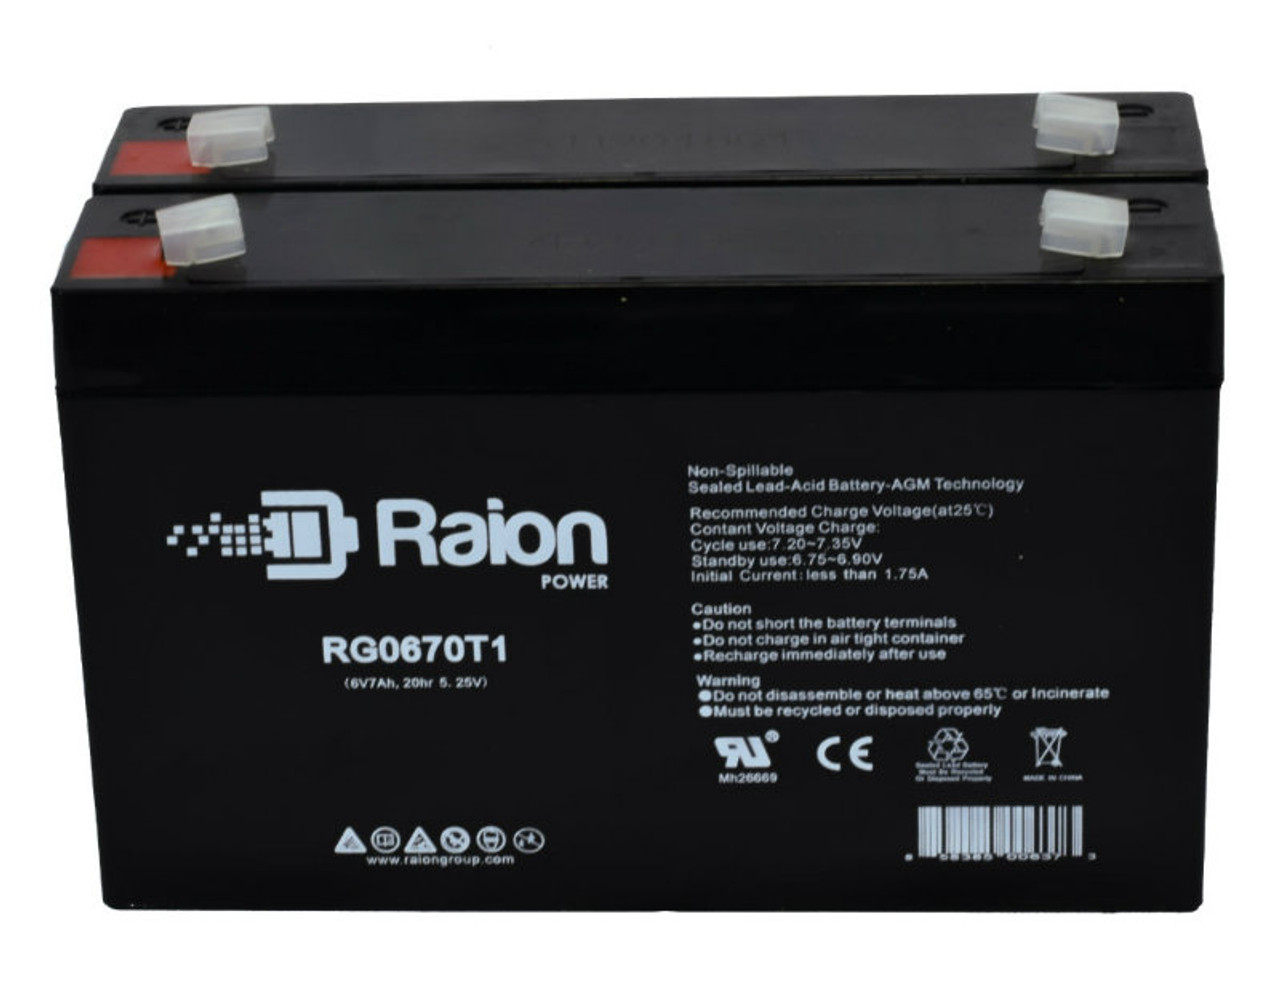 Raion Power RG0670T1 6V 7Ah Replacement Emergency Light Battery for Trio TL930210 - 2 Pack